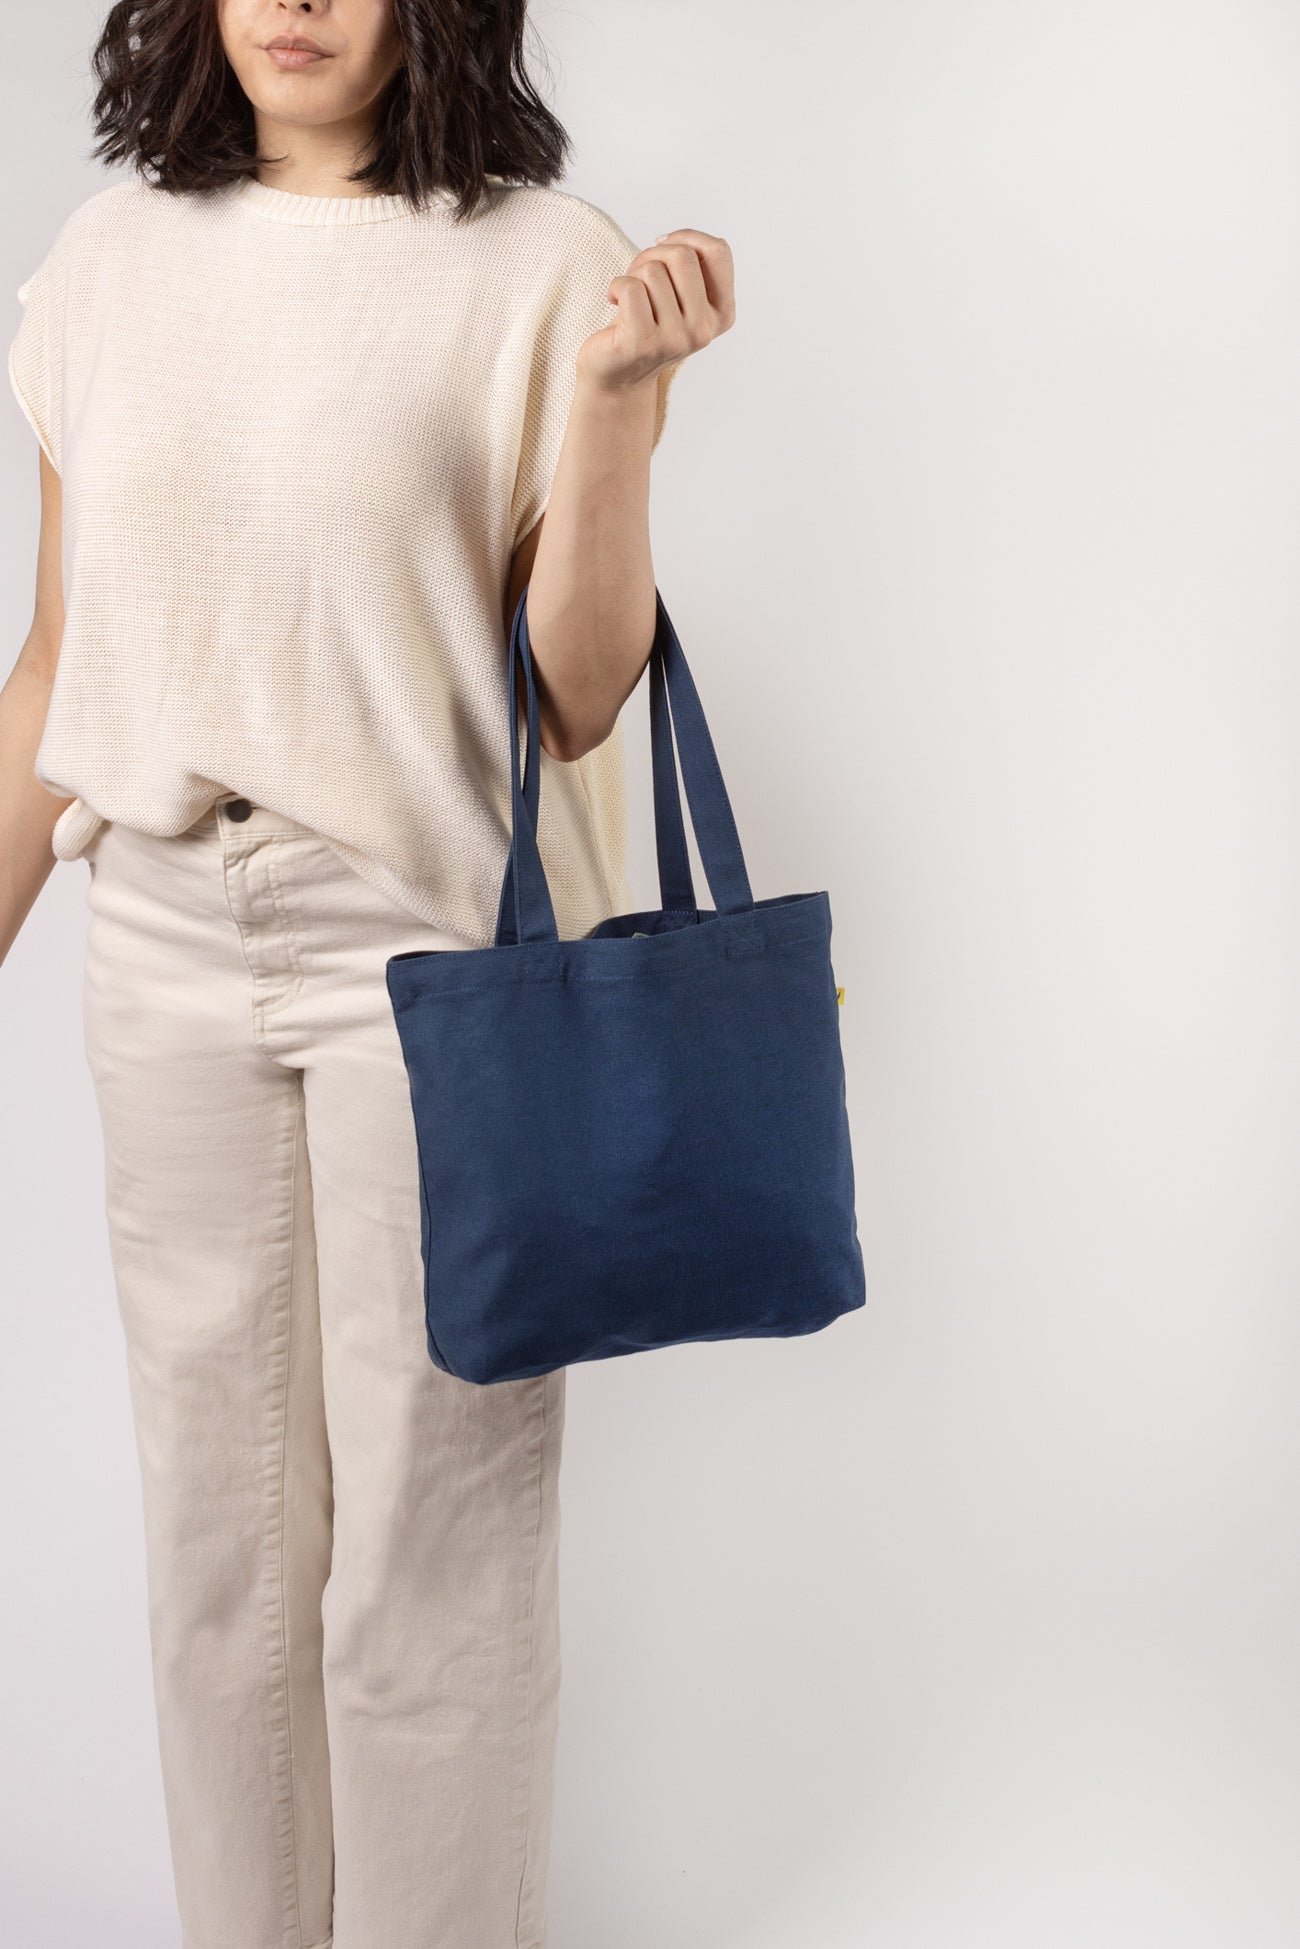 Baby Tote - Classic Navy